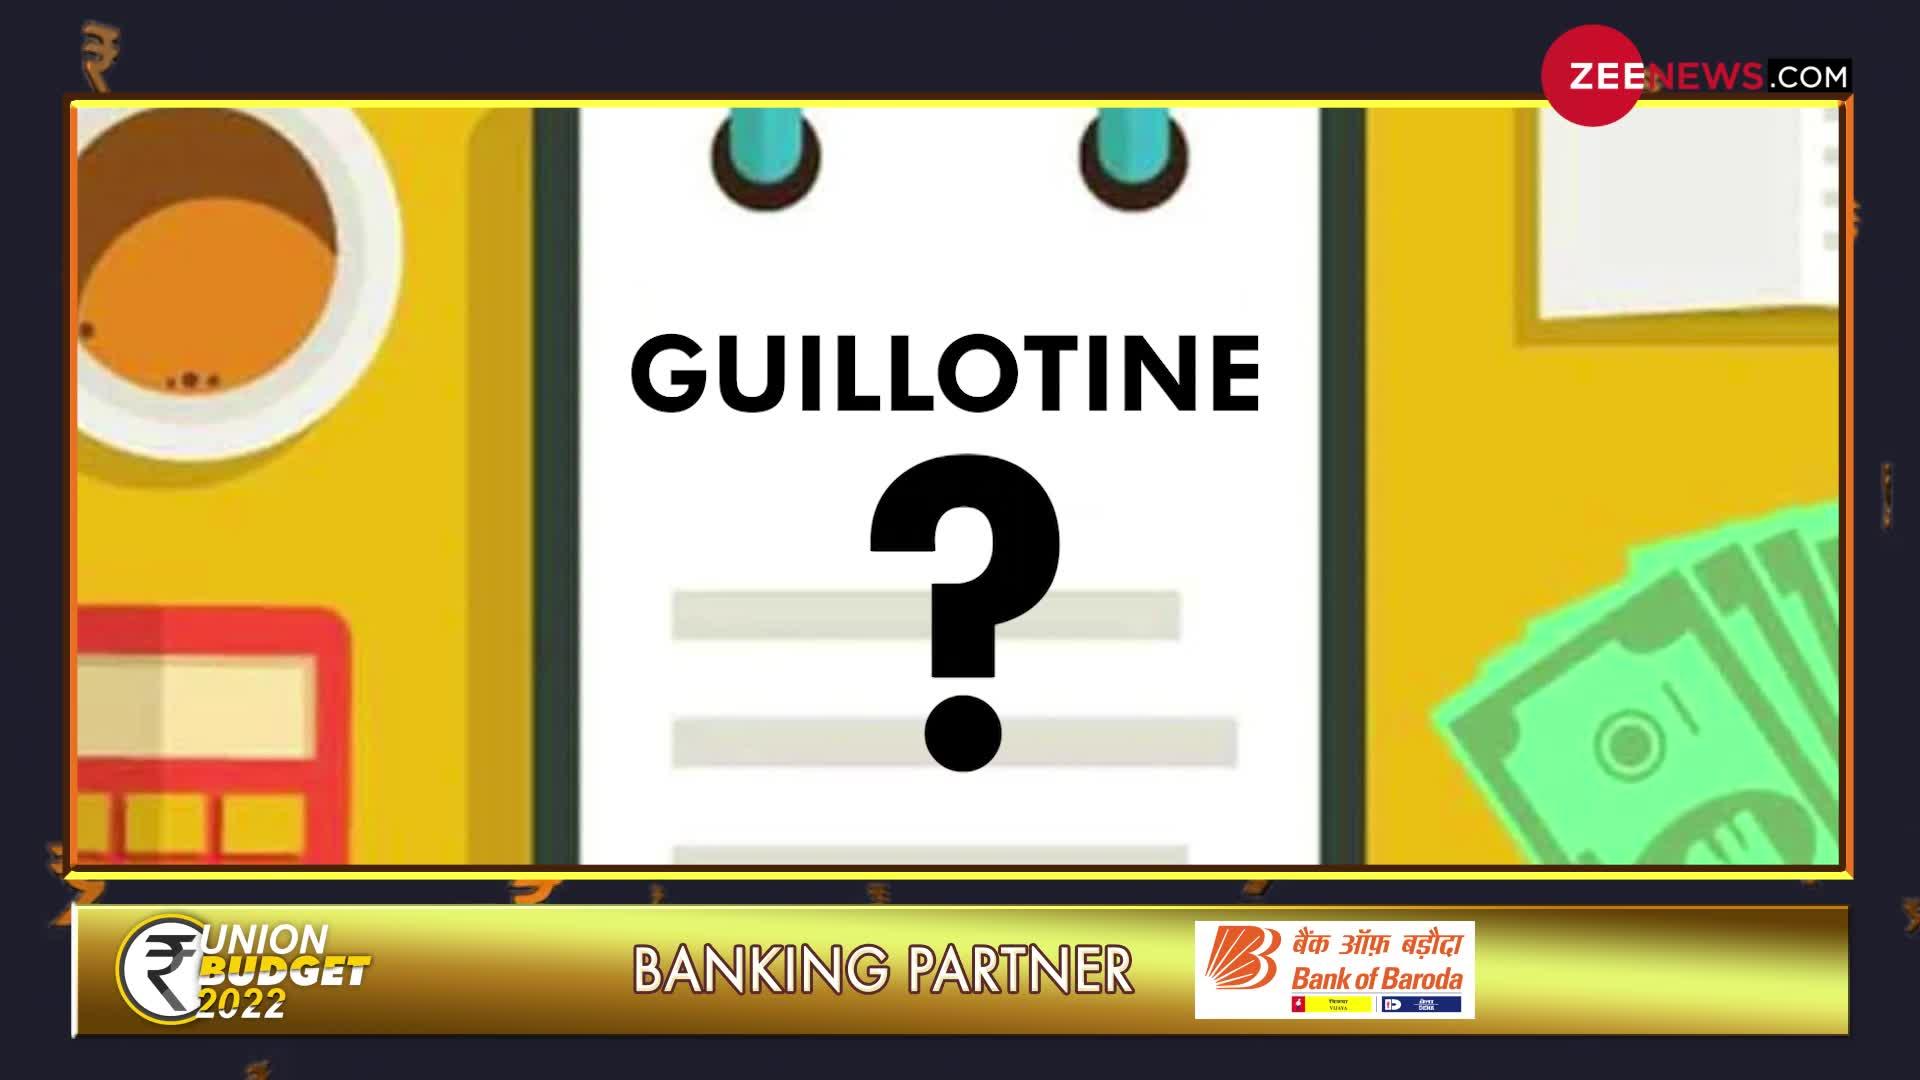 Union Budget 2022: What is Guillotine? | क्या होता है Guillotine?